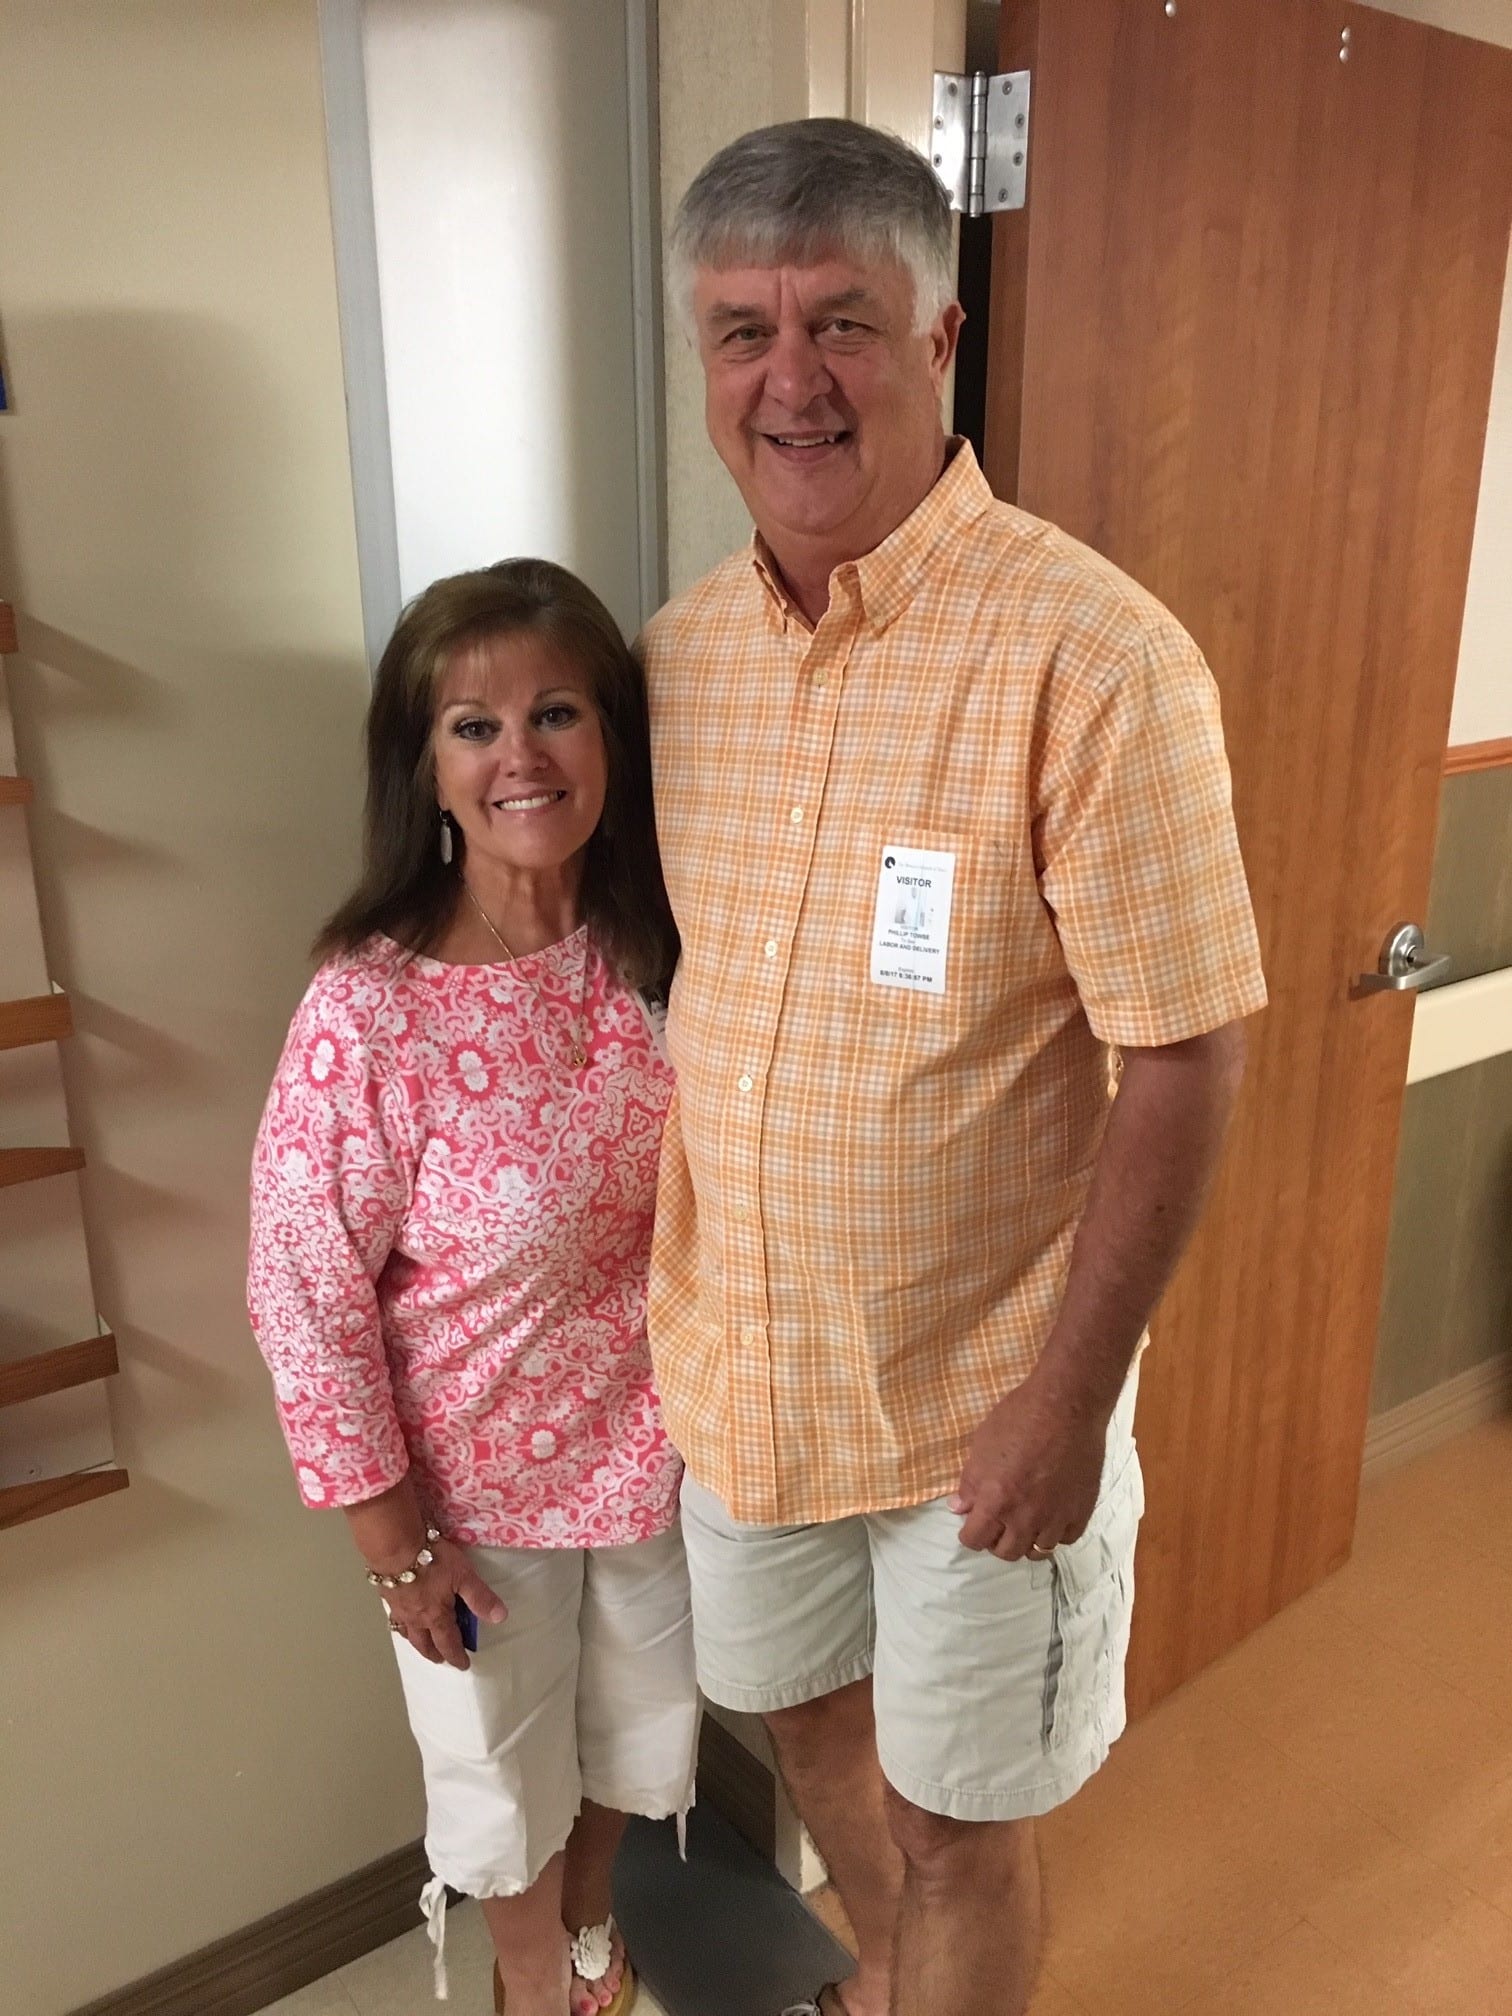 Phil Towse, a COVID-19 patient who received a convalescent plasma transfusion, with his wife, Cathye Jo.